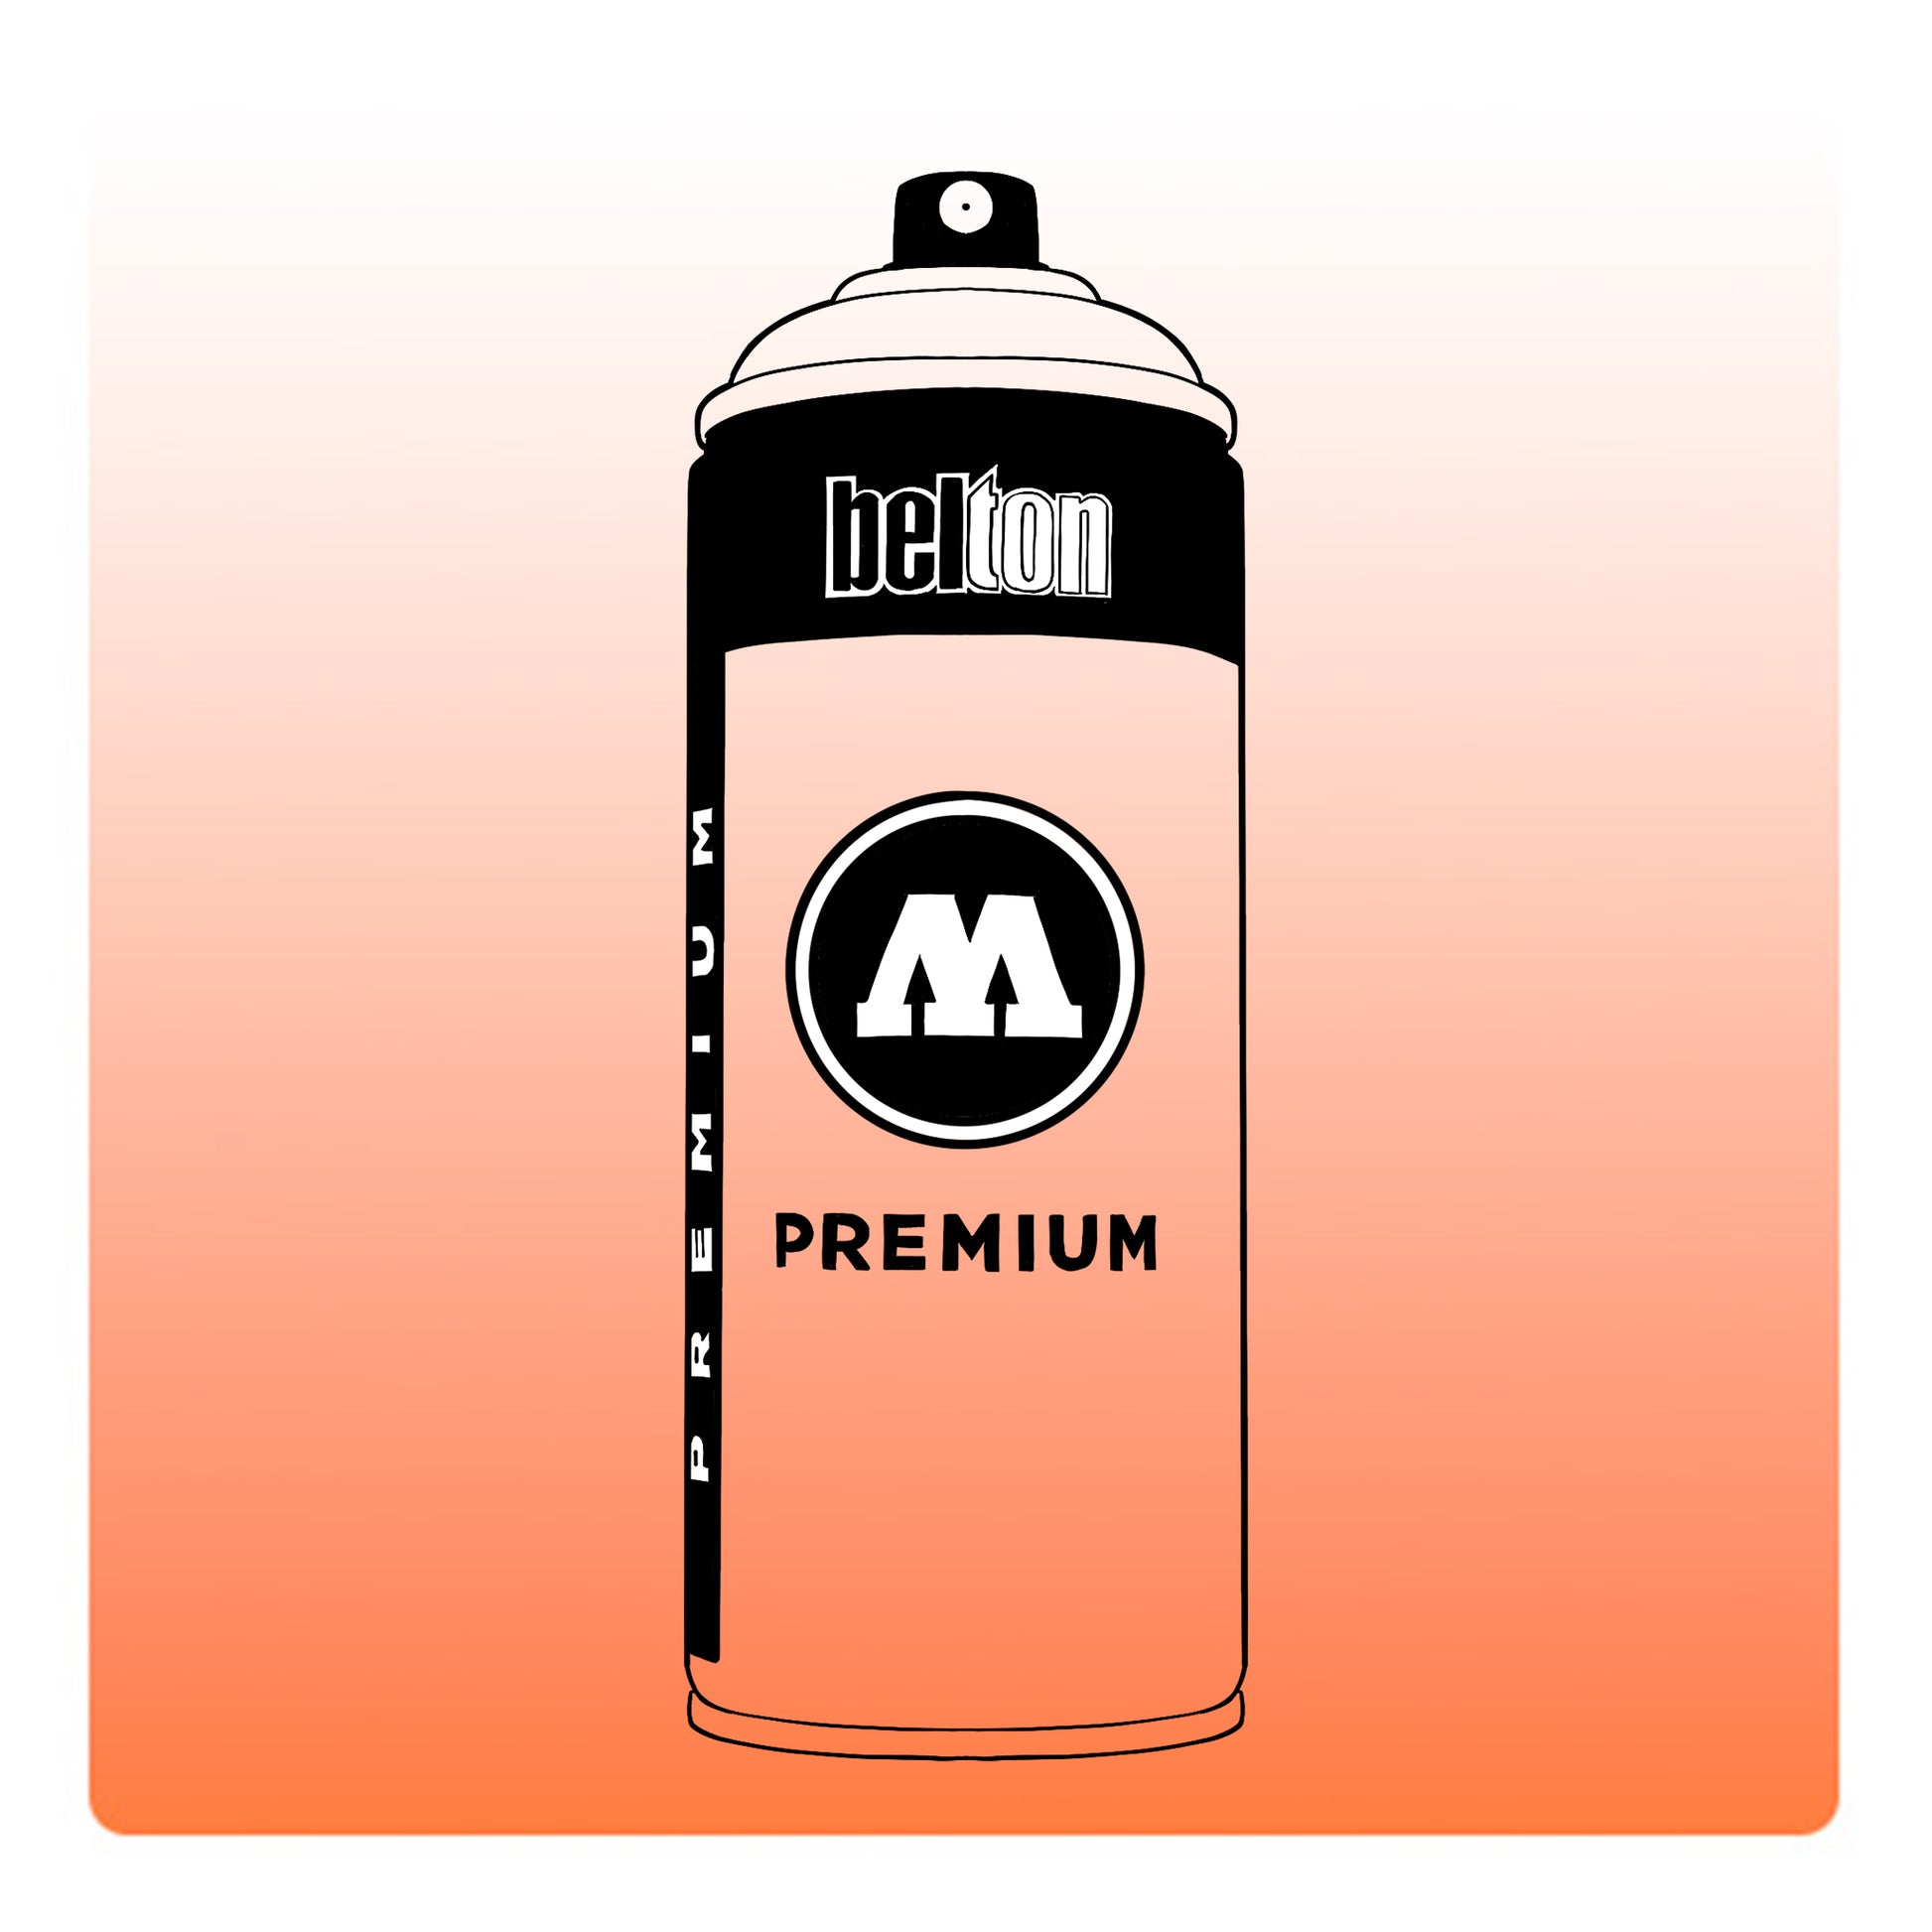 A line drawing of a spray paint can with a transparent, orange color swatch.